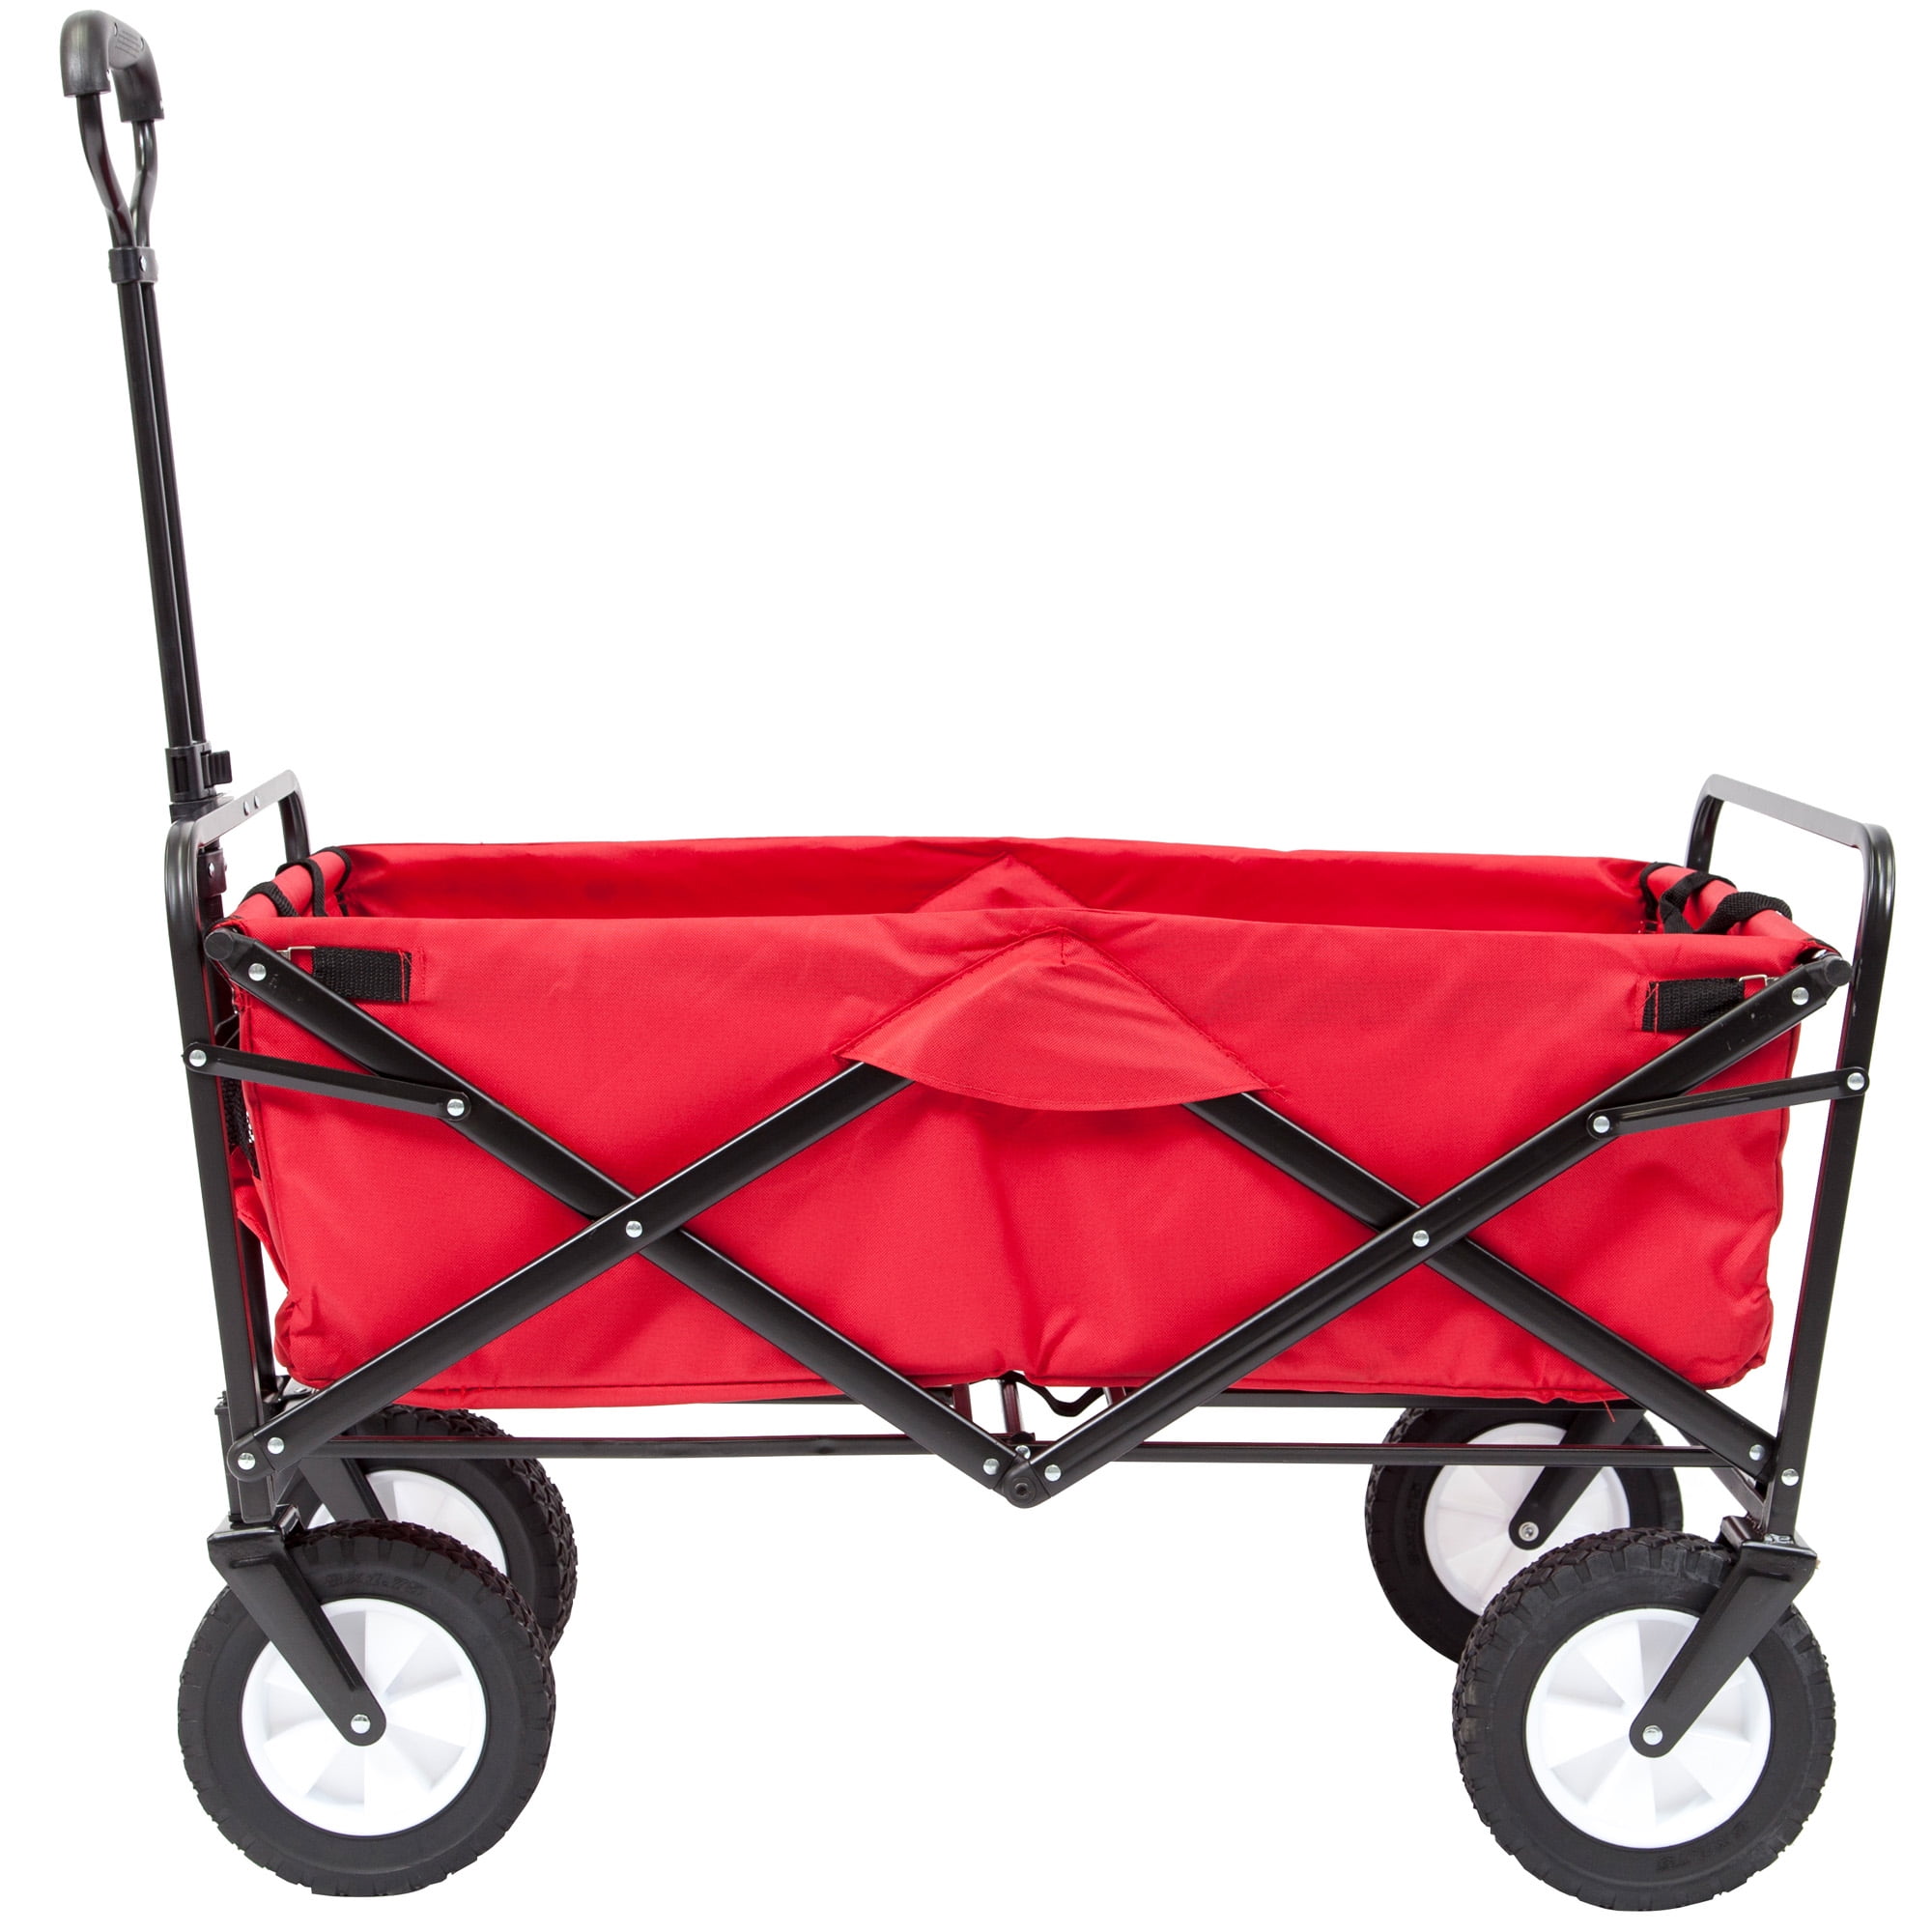 Details about   Heavy Duty Collapsible Outdoor Utility Wagon Folding Portable Hand Cart Sport 